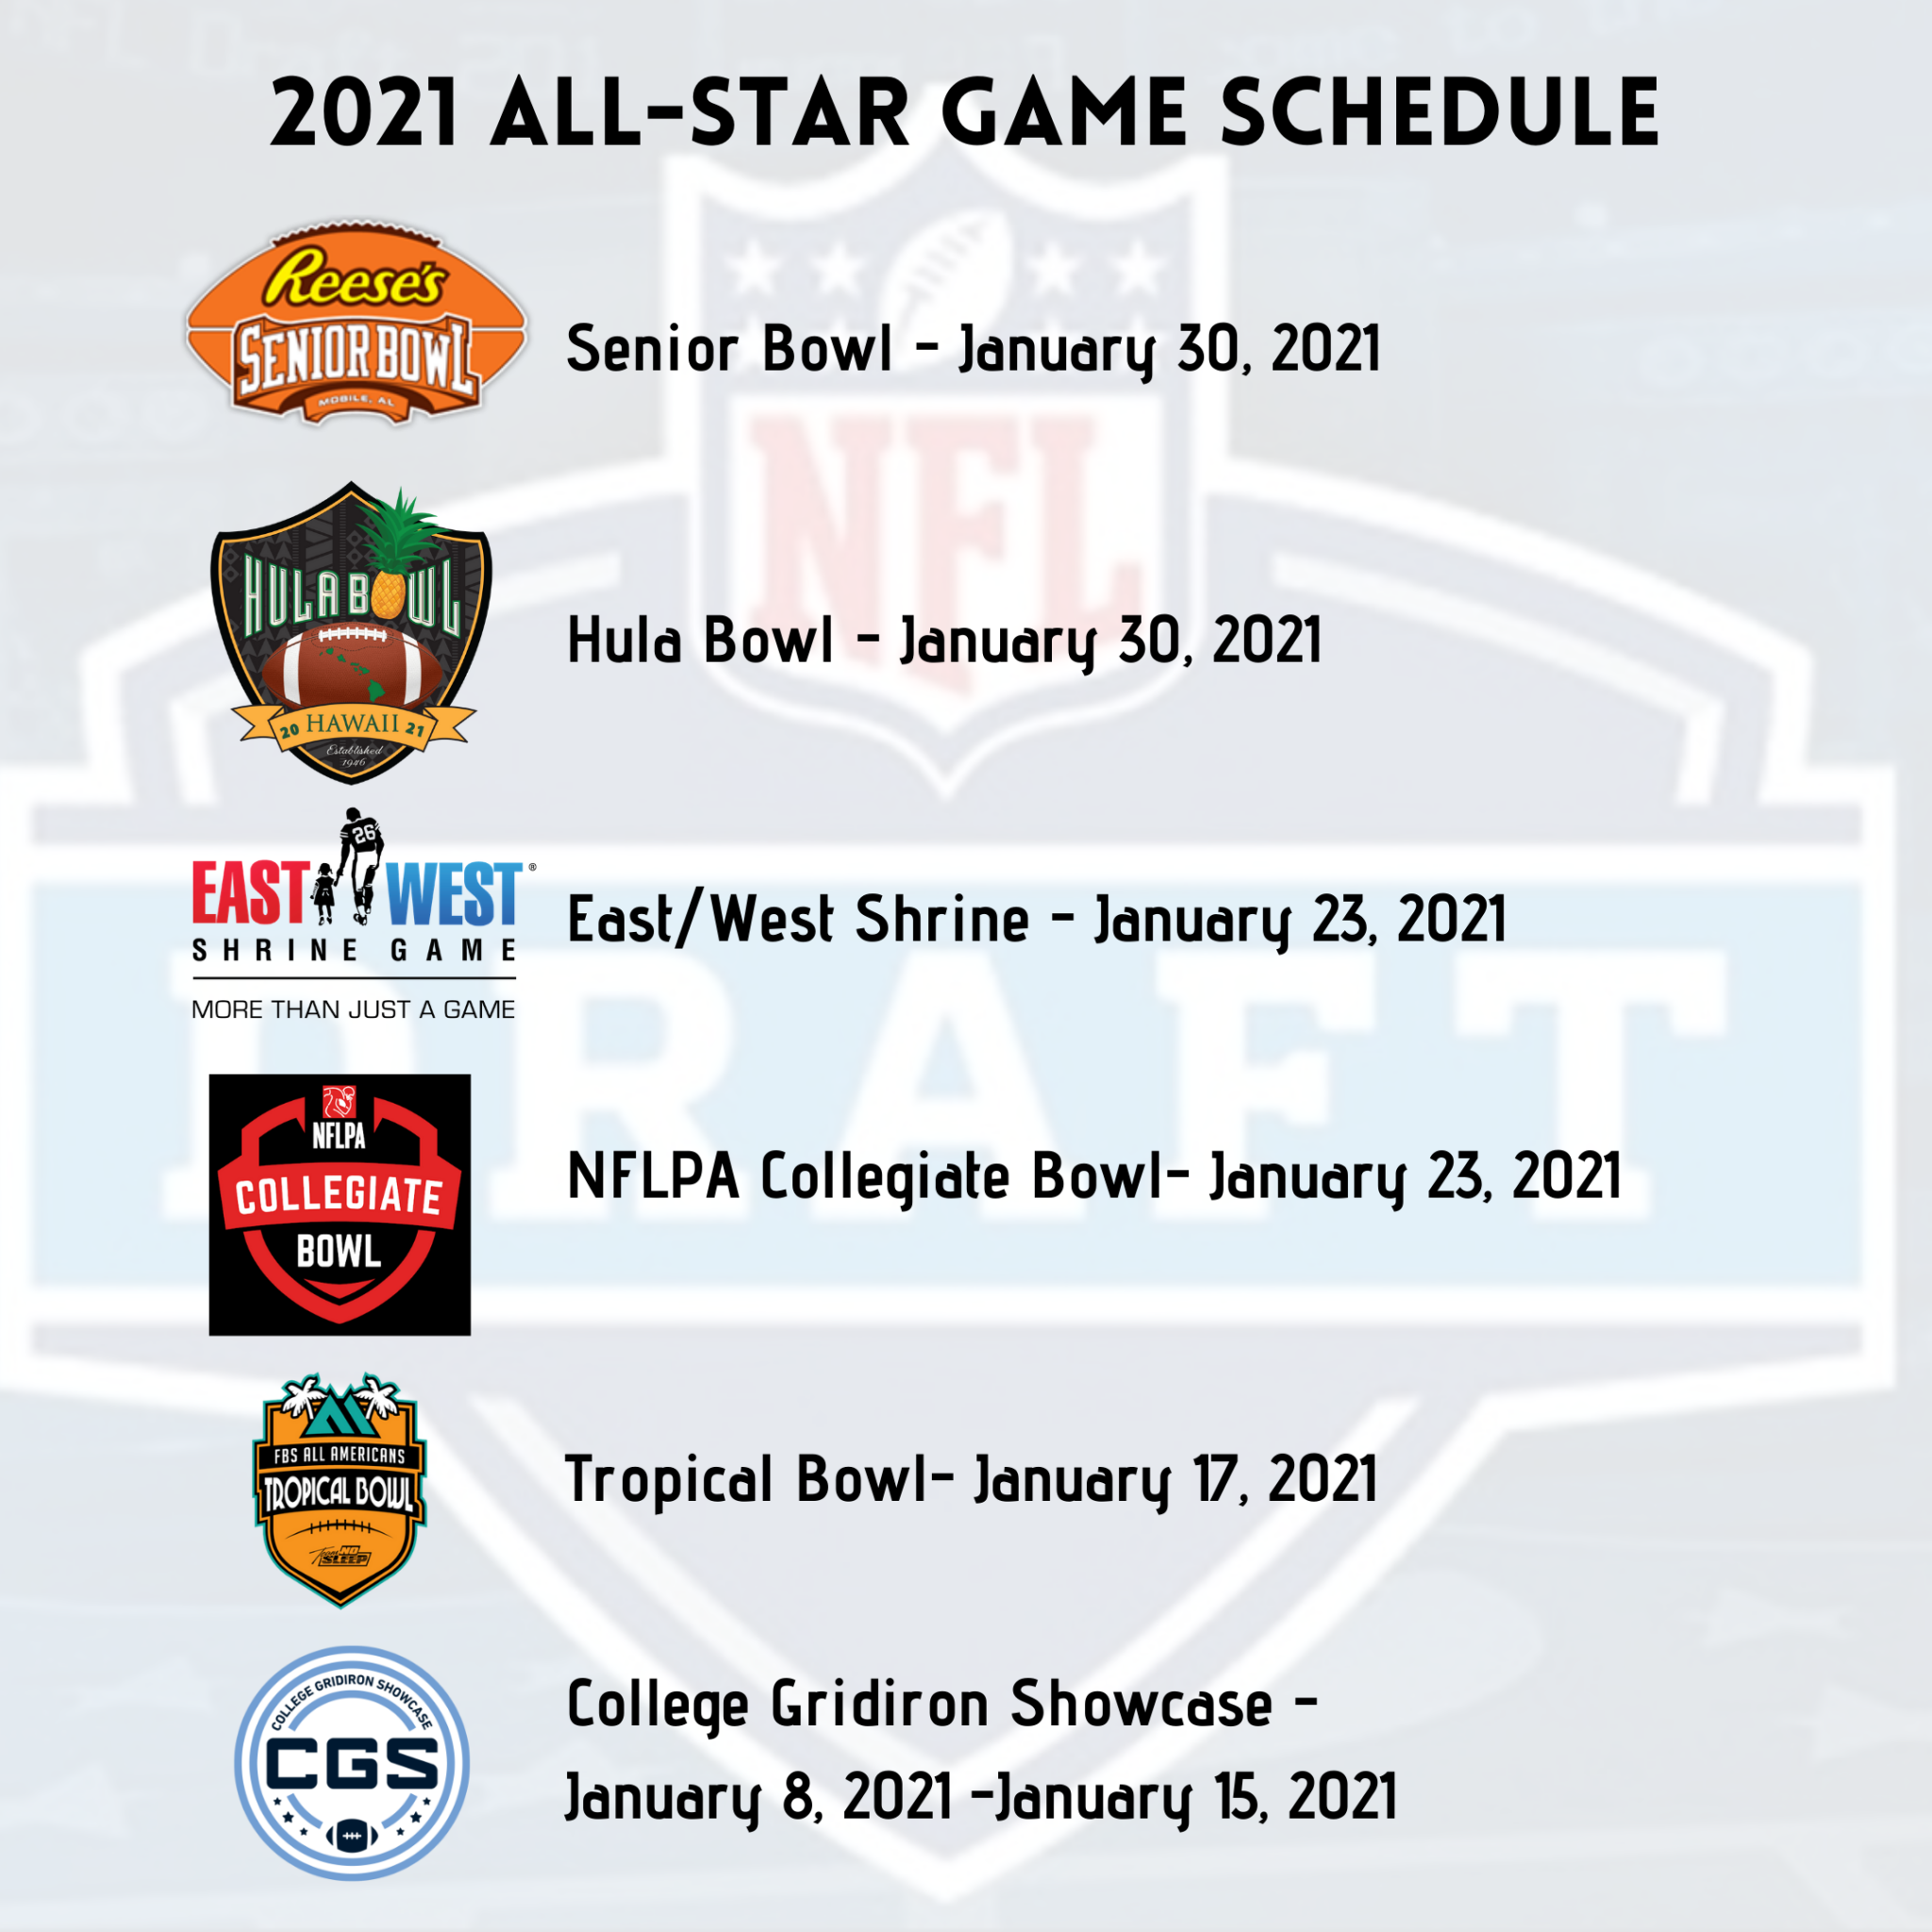 2021 College Football All-Star Game Schedule